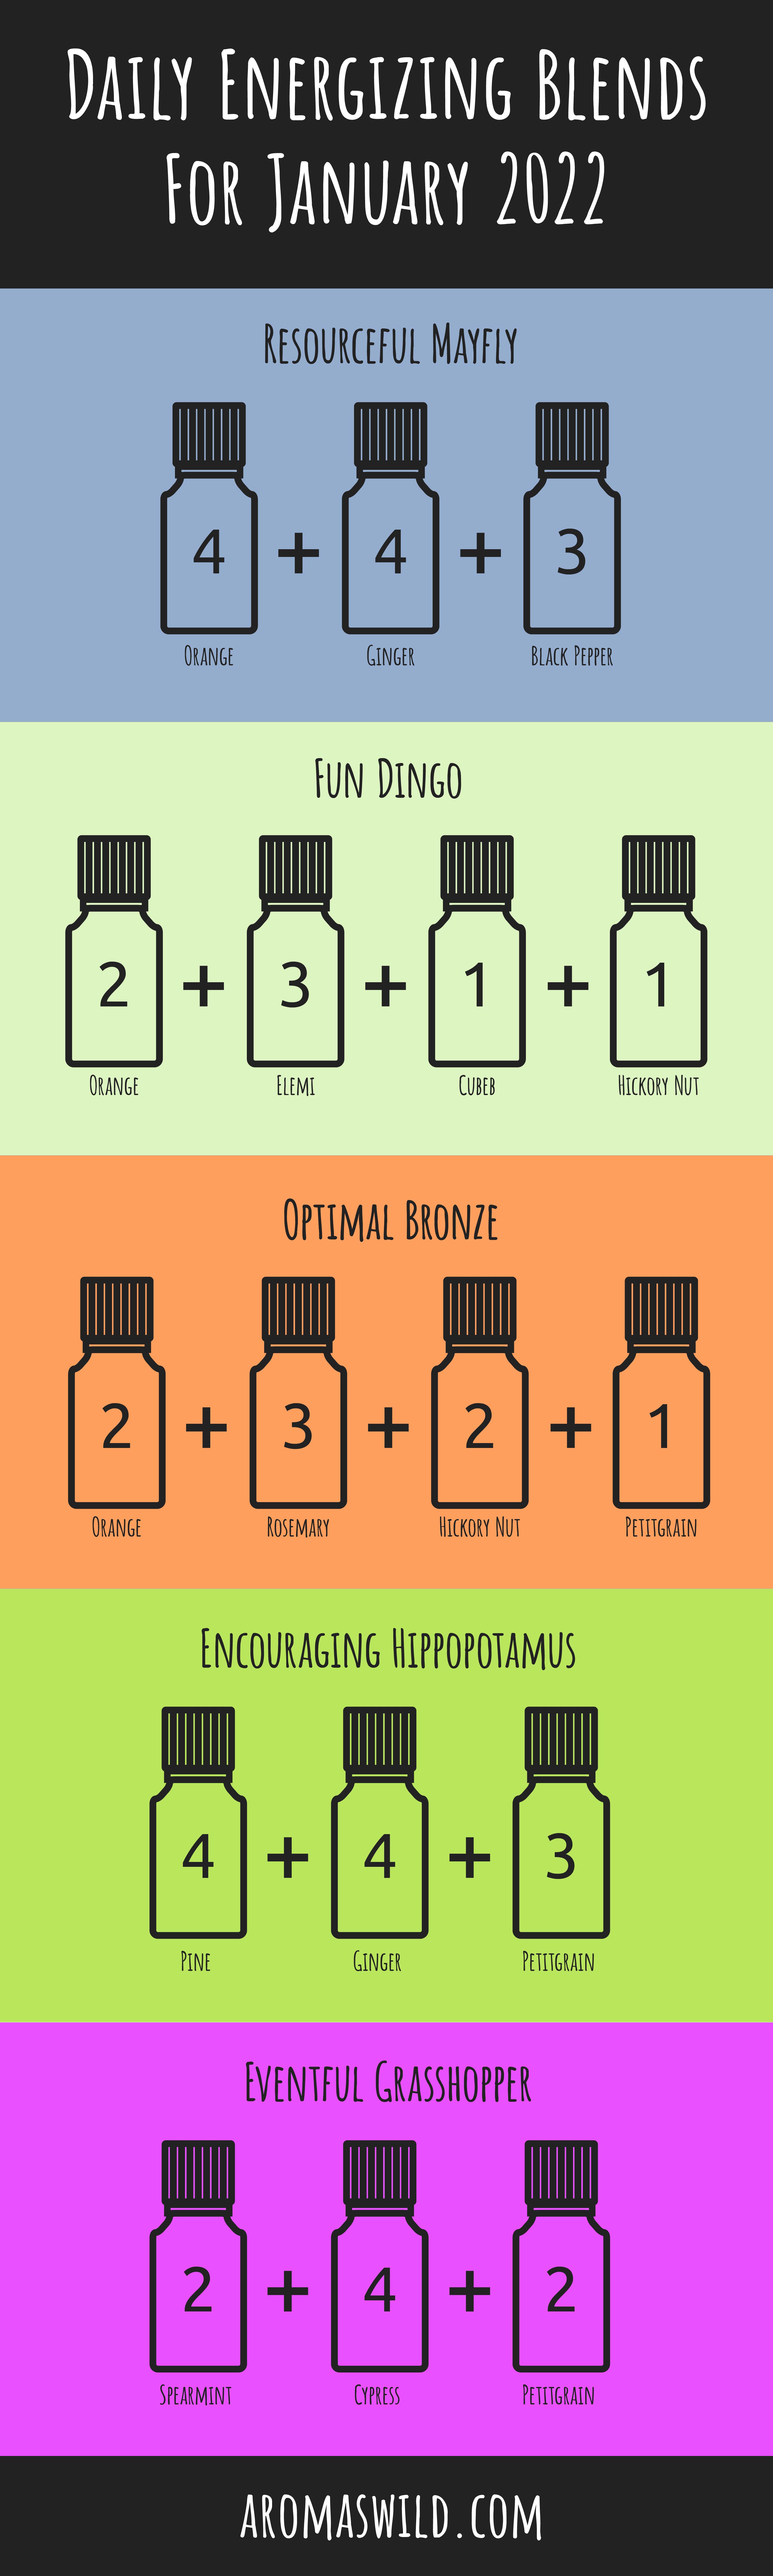 eucalyptus essential oil blend recipes – Daily Energizing Blends For 21 January 2022